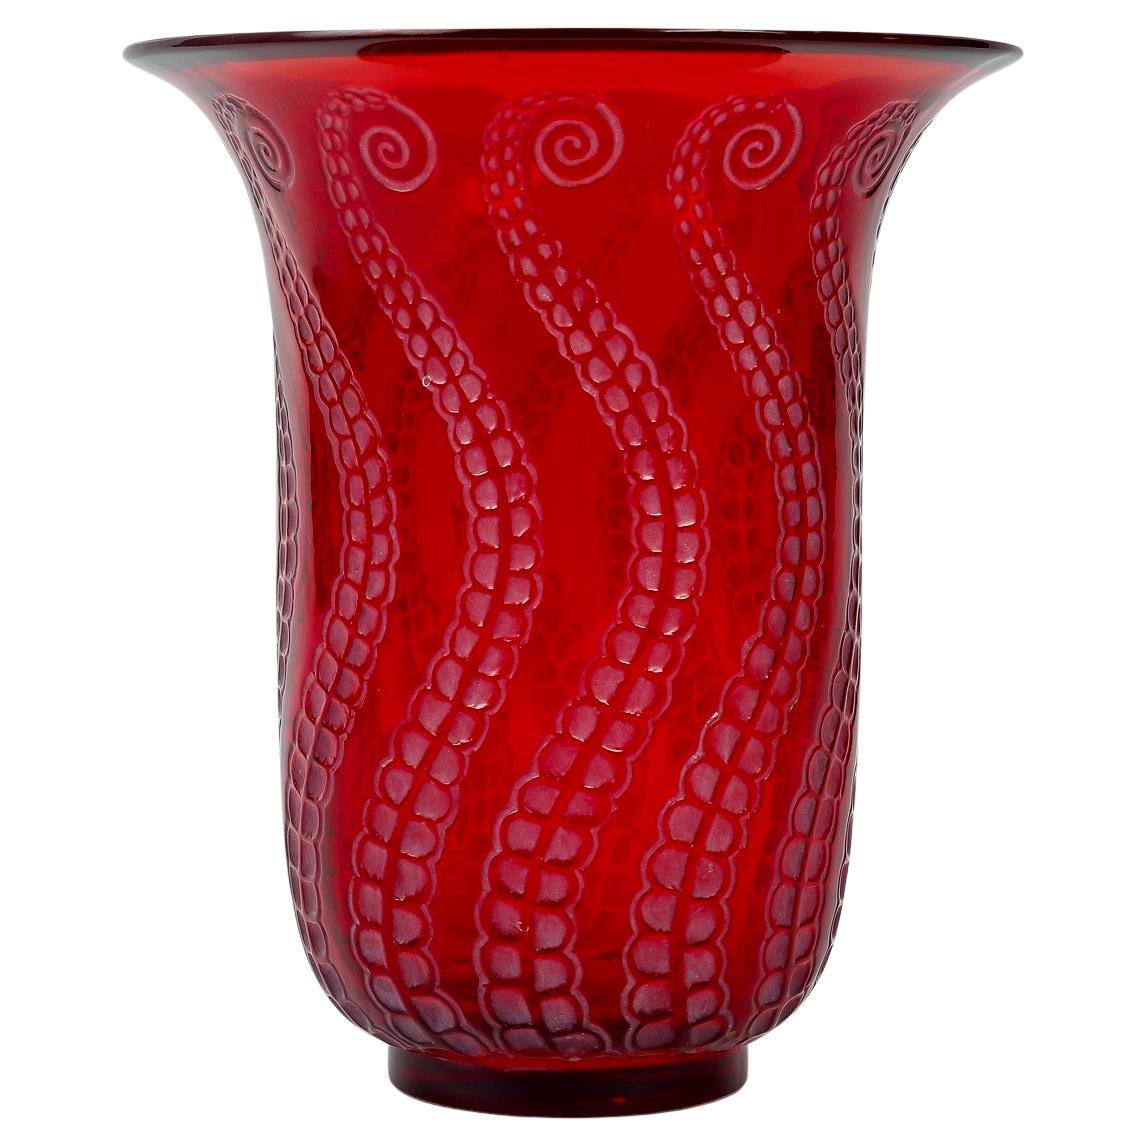 1921 Rene Lalique Vase Medusa Cased Red Glass with White Patina